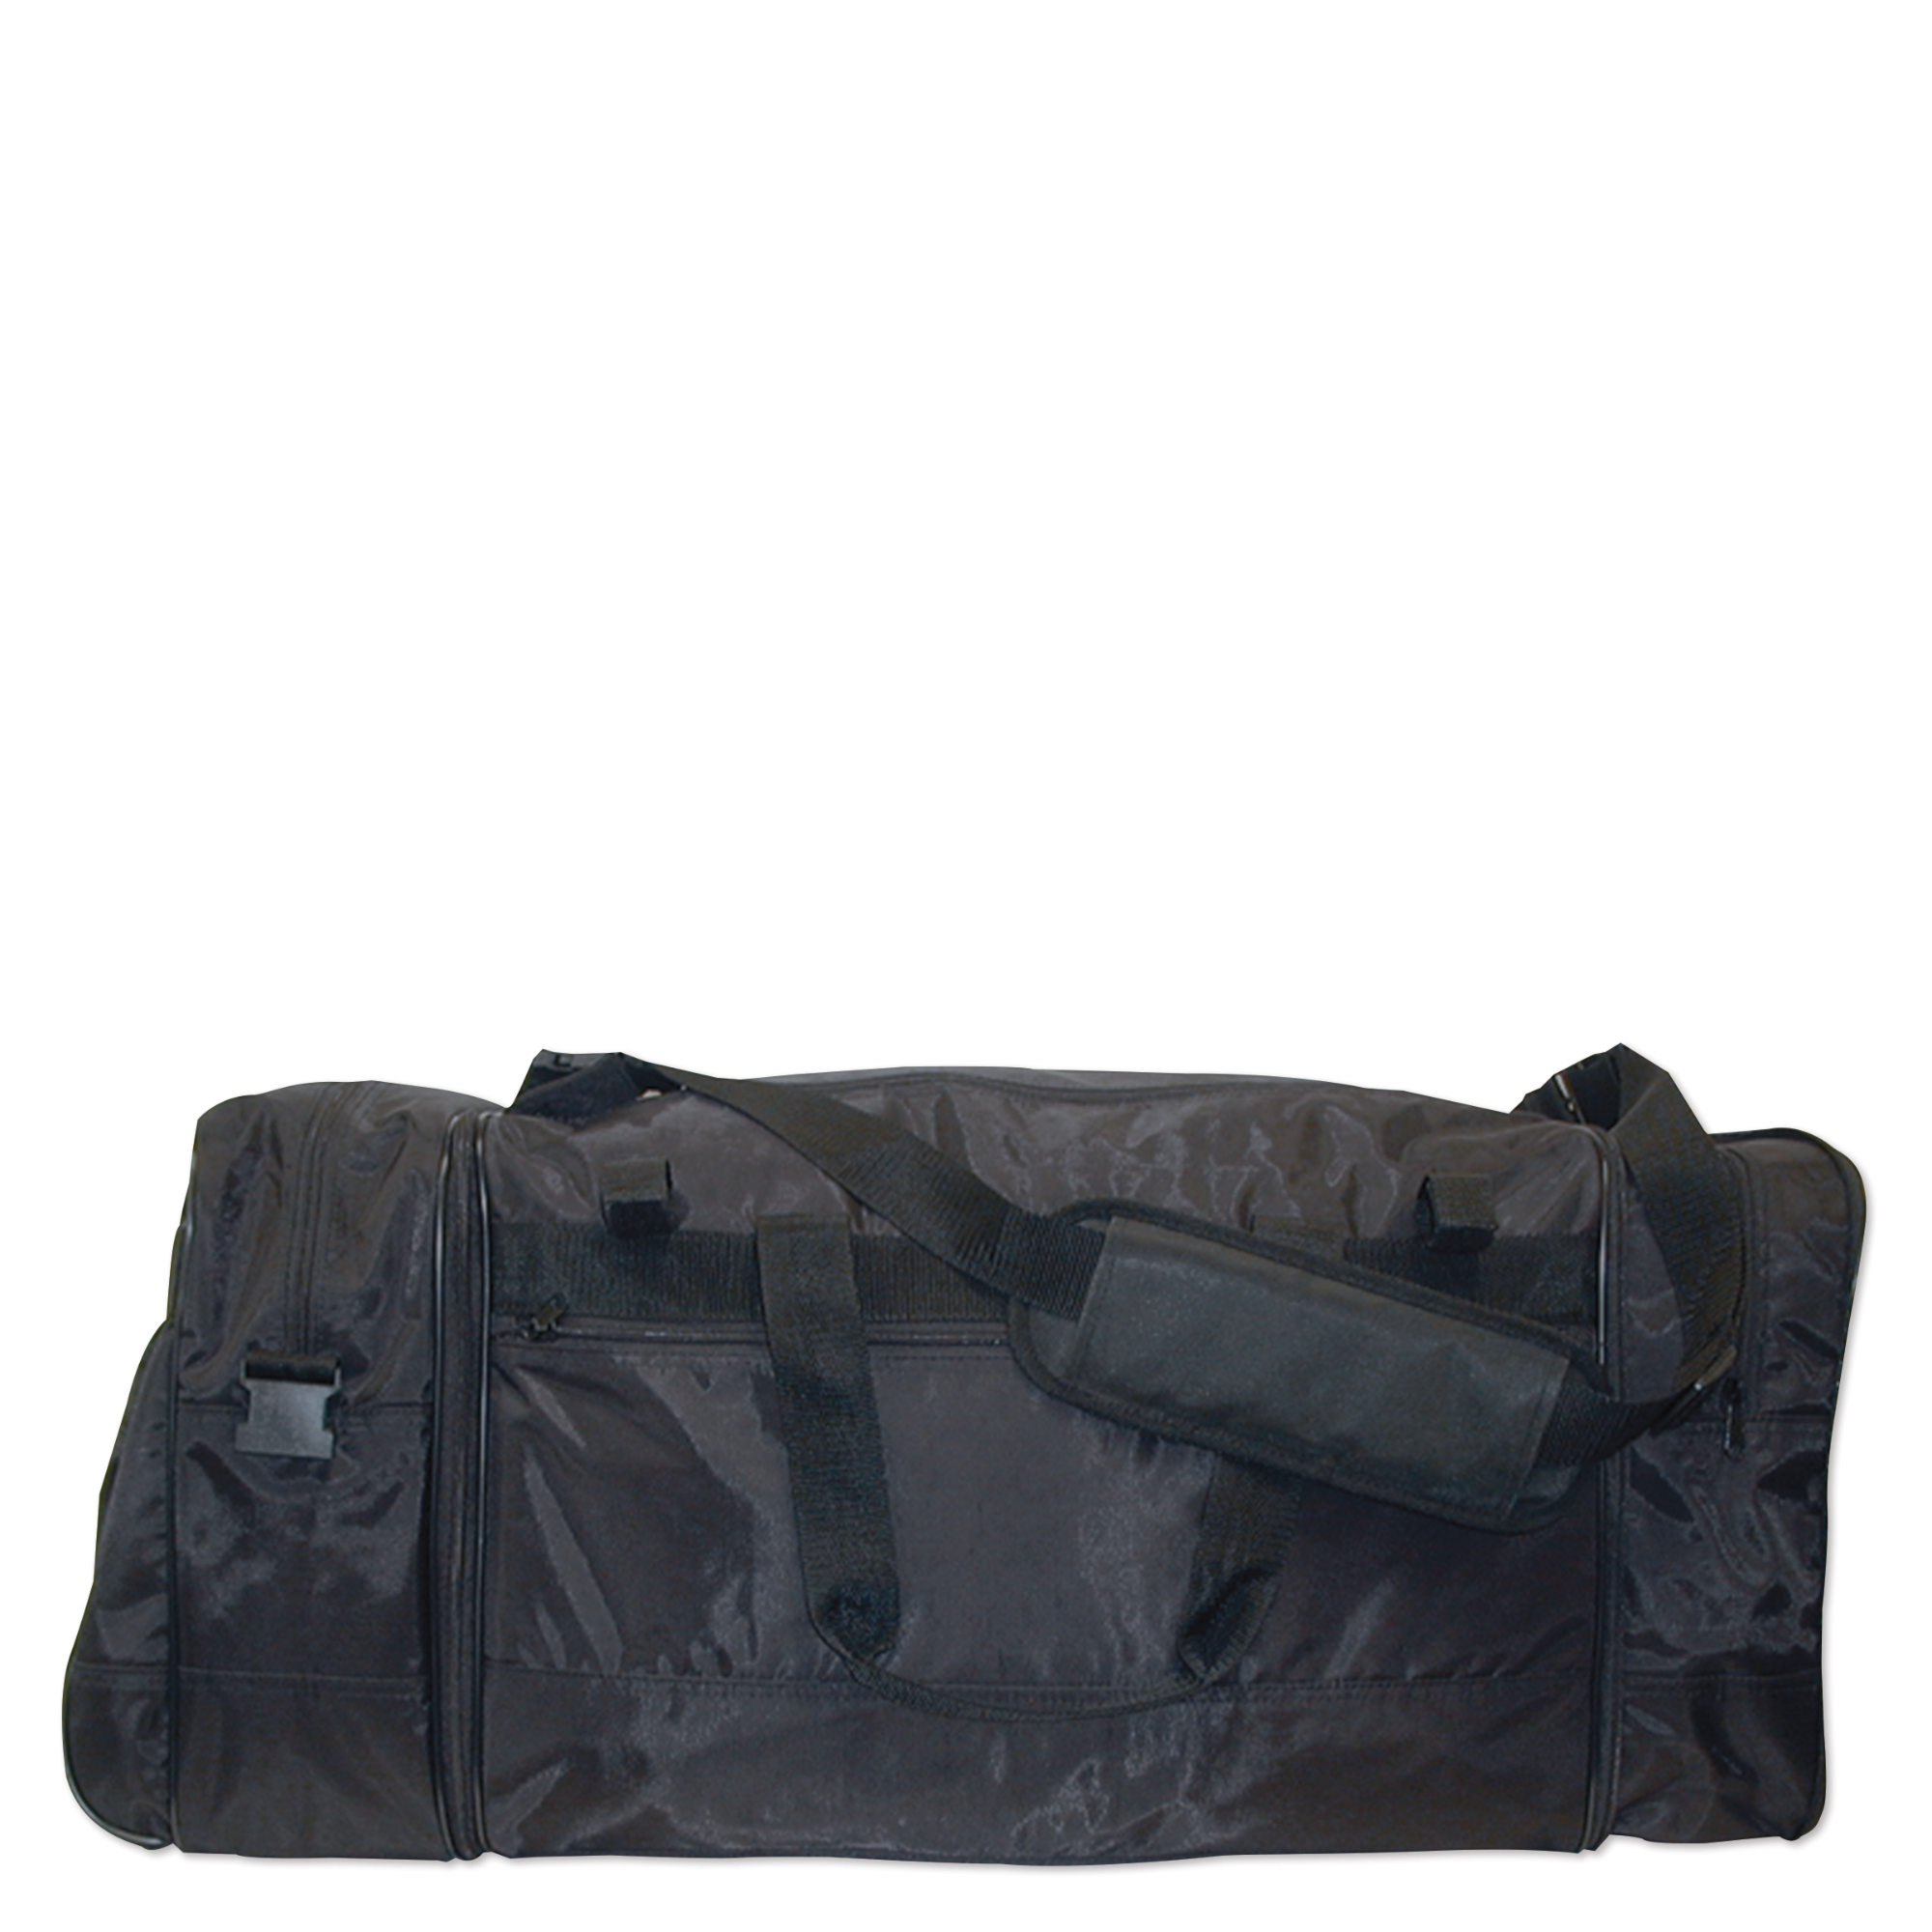 Expandable Tote with Detachable Carry-All Bag